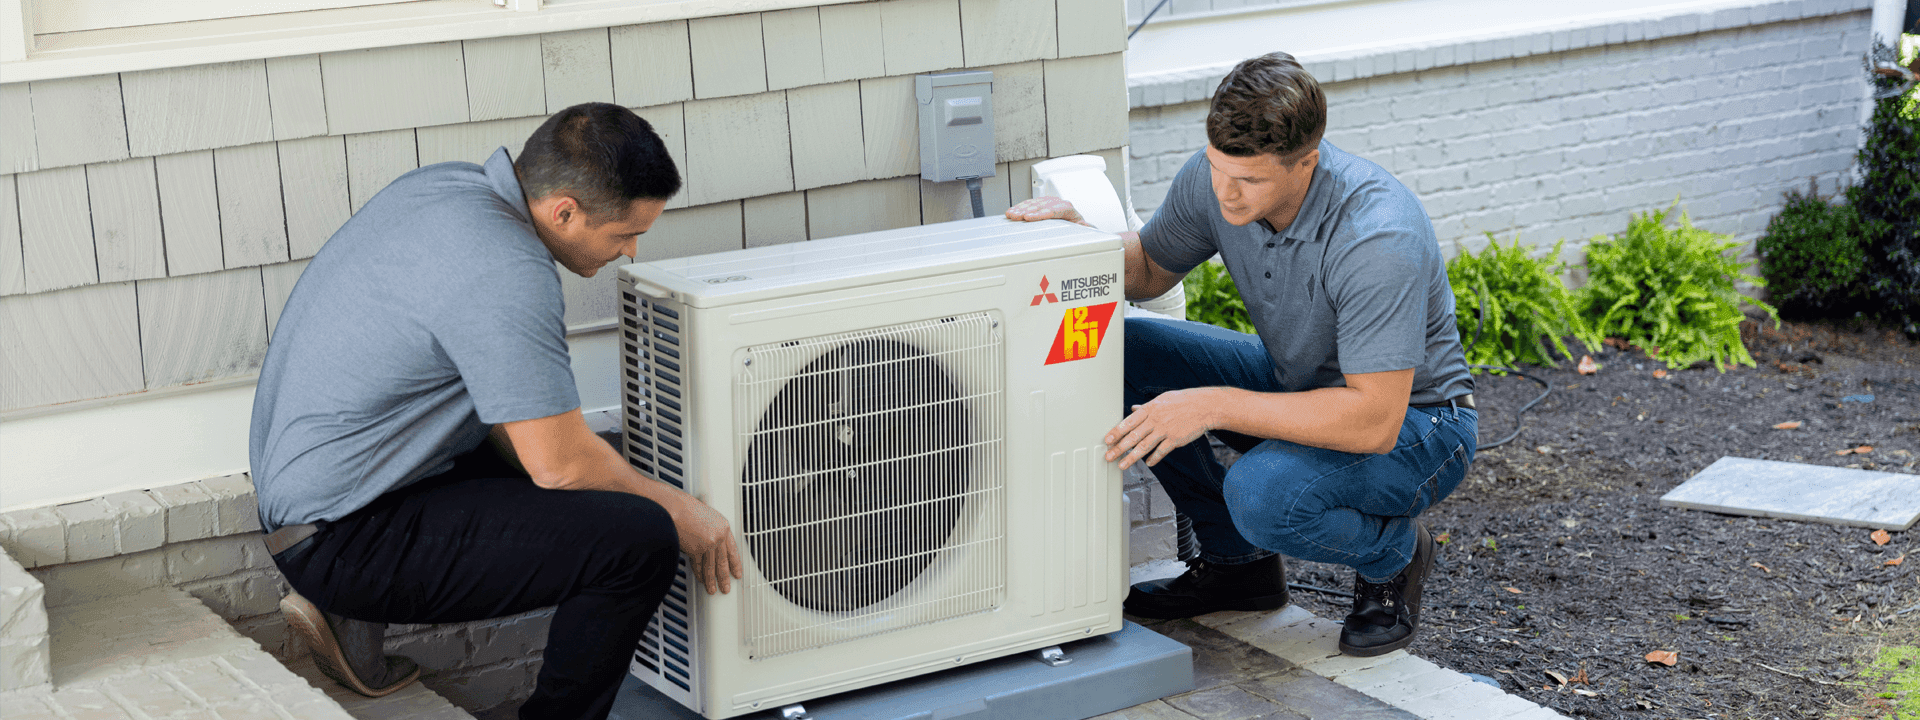 Get your HVAC project started